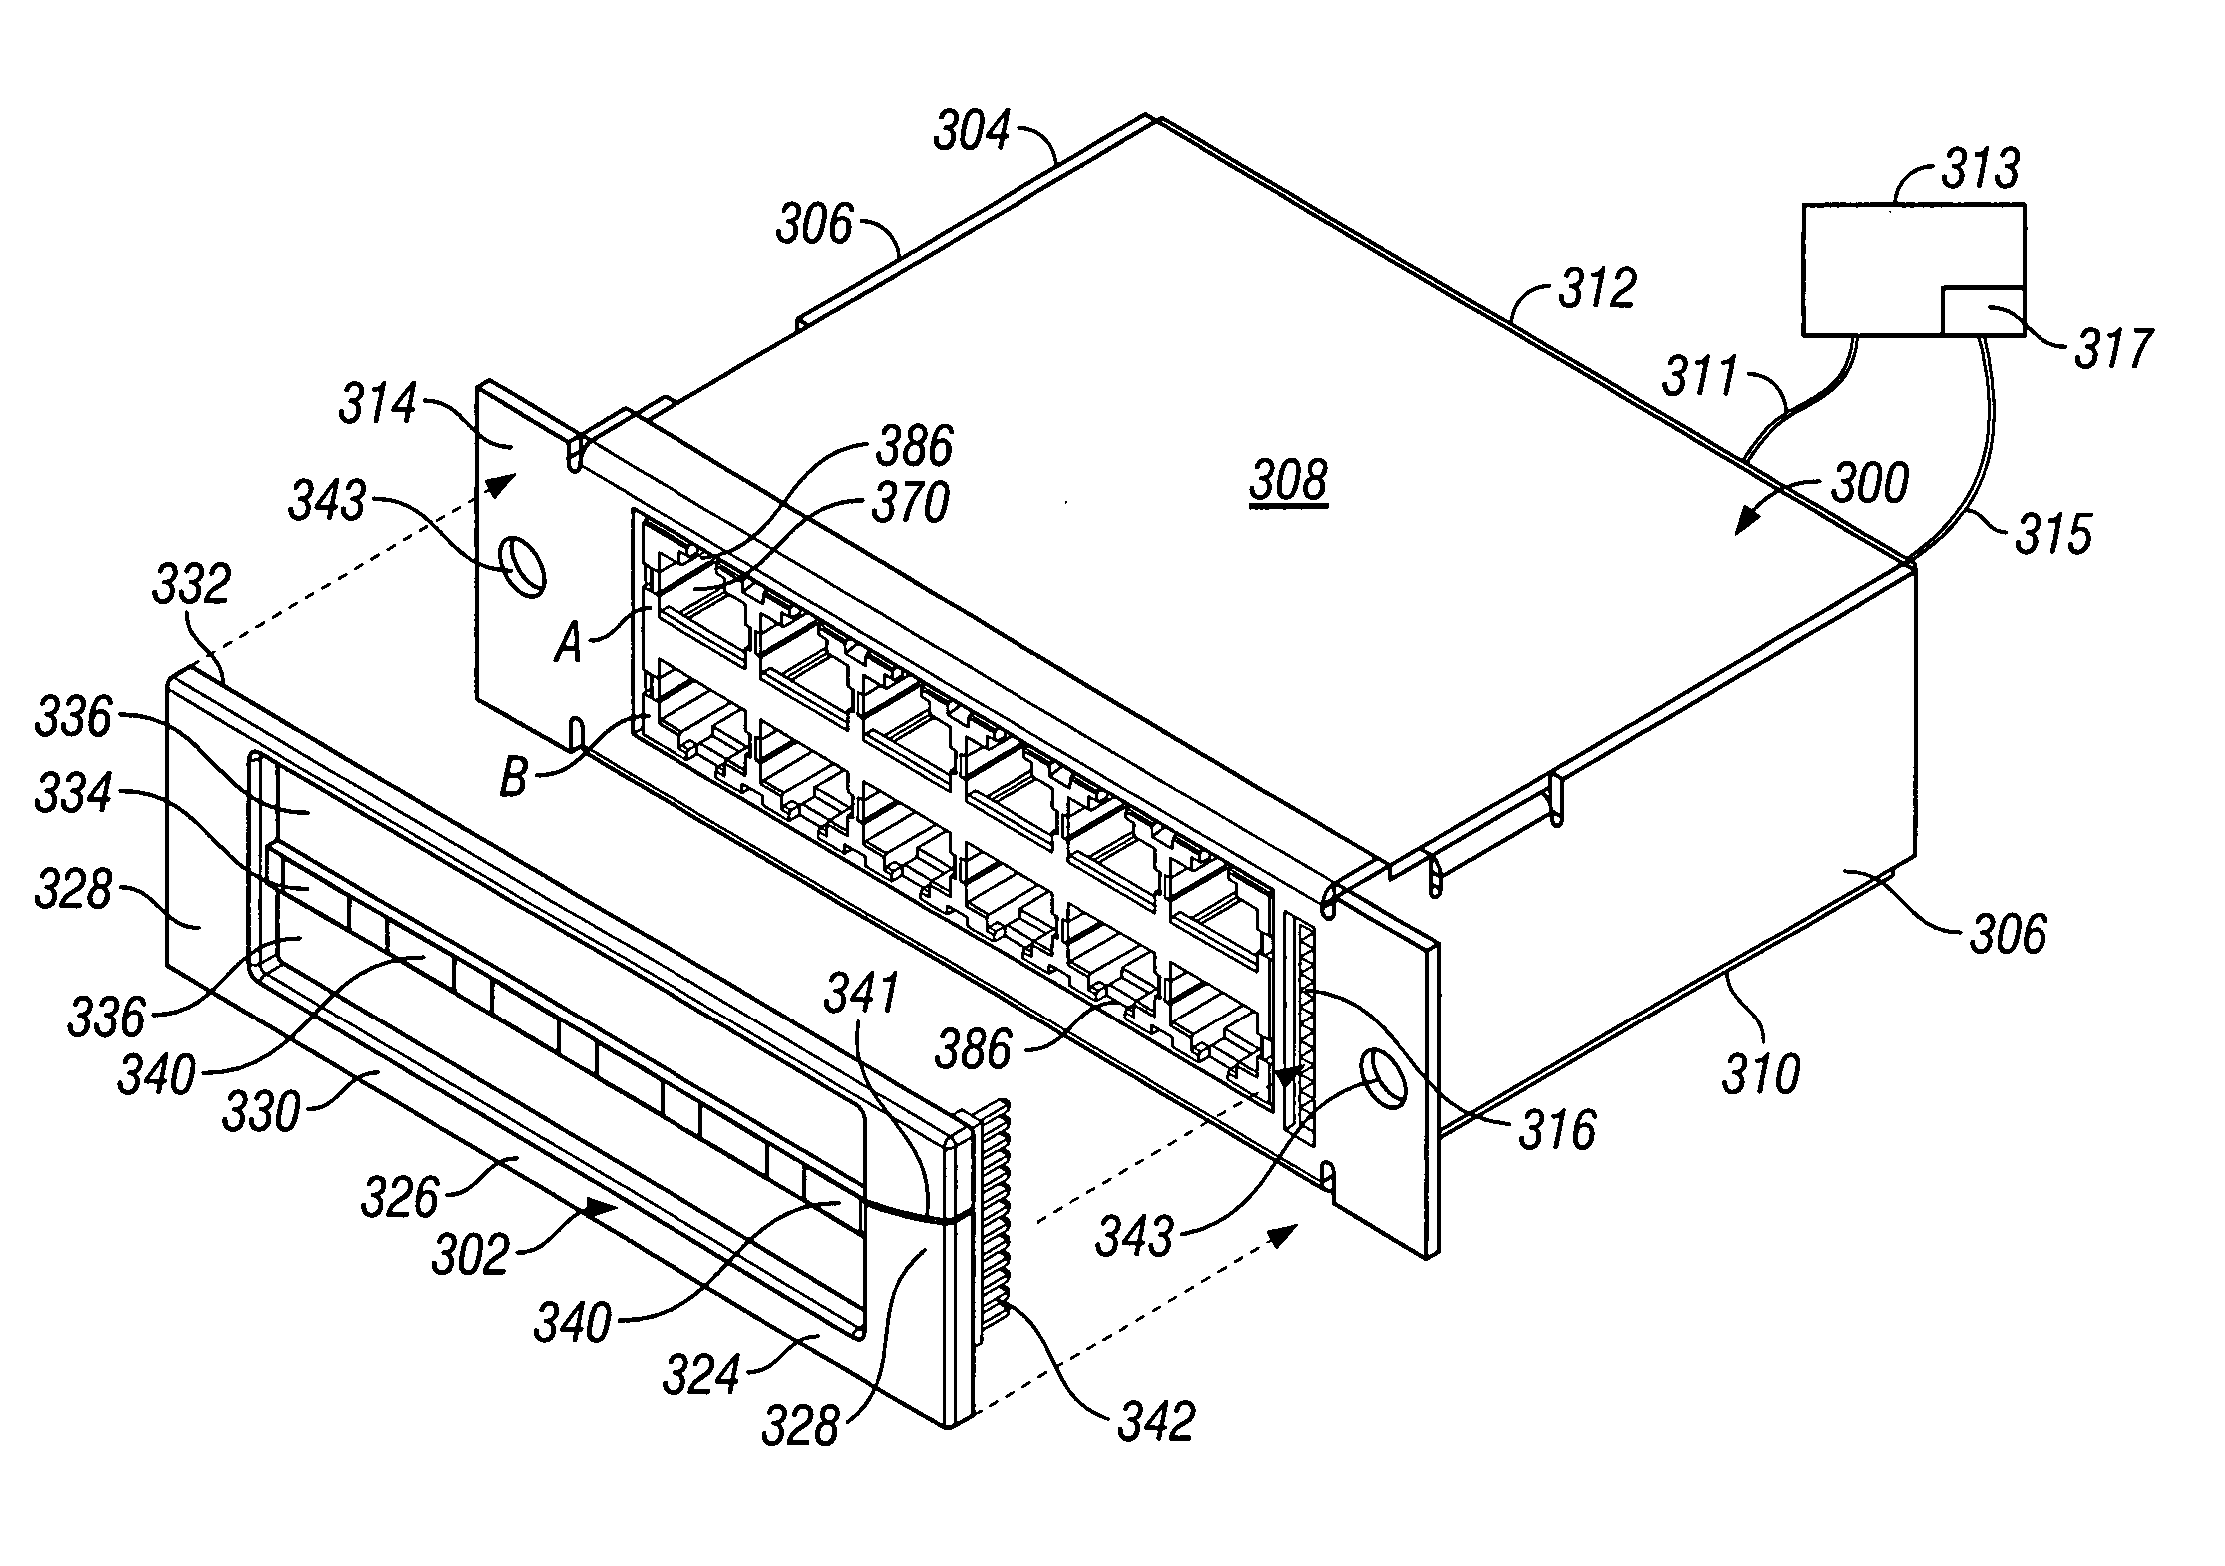 Network connection sensing assembly